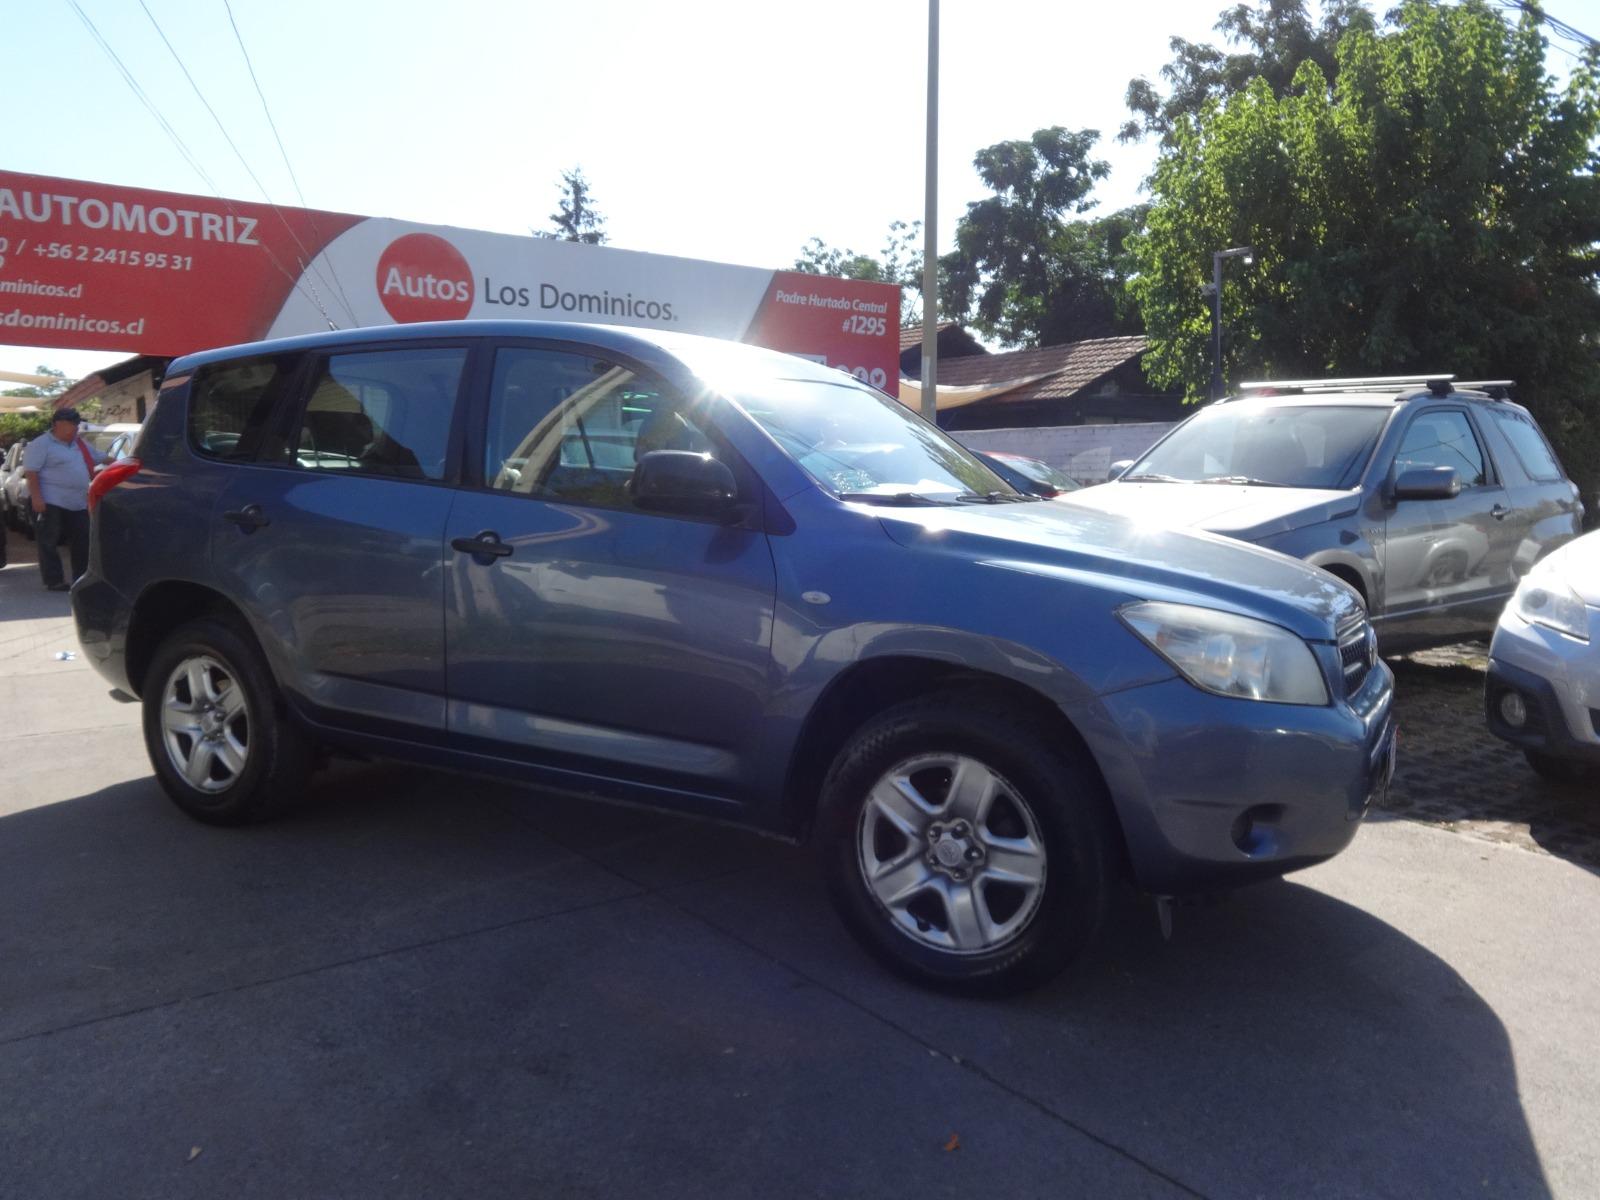 TOYOTA RAV 4 2.4 Automatica 2006 FULL AIRE AIRBAG ABS - FULL MOTOR